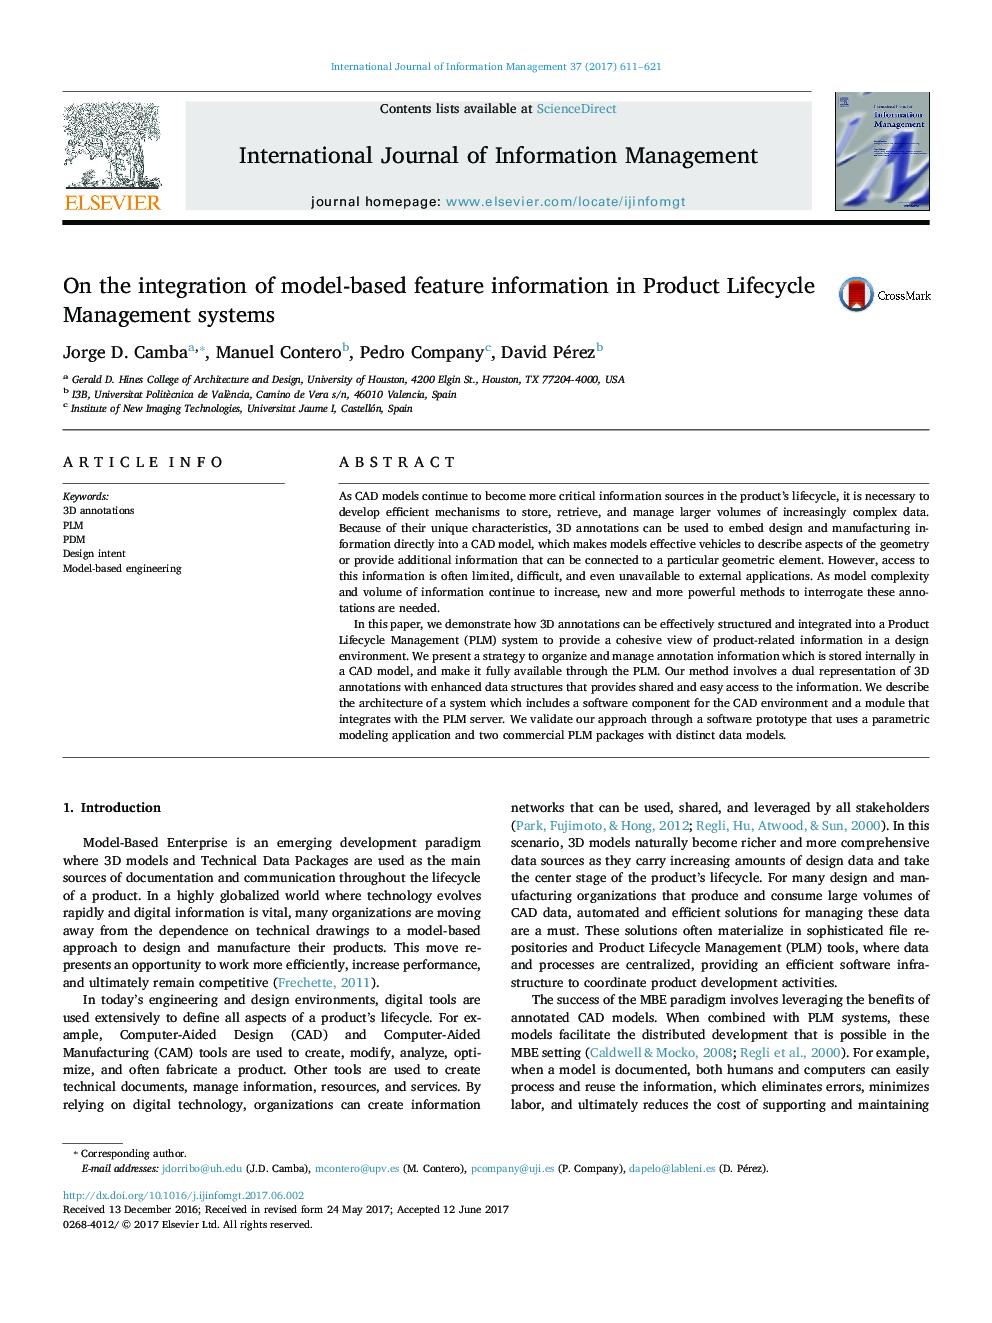 On the integration of model-based feature information in Product Lifecycle Management systems